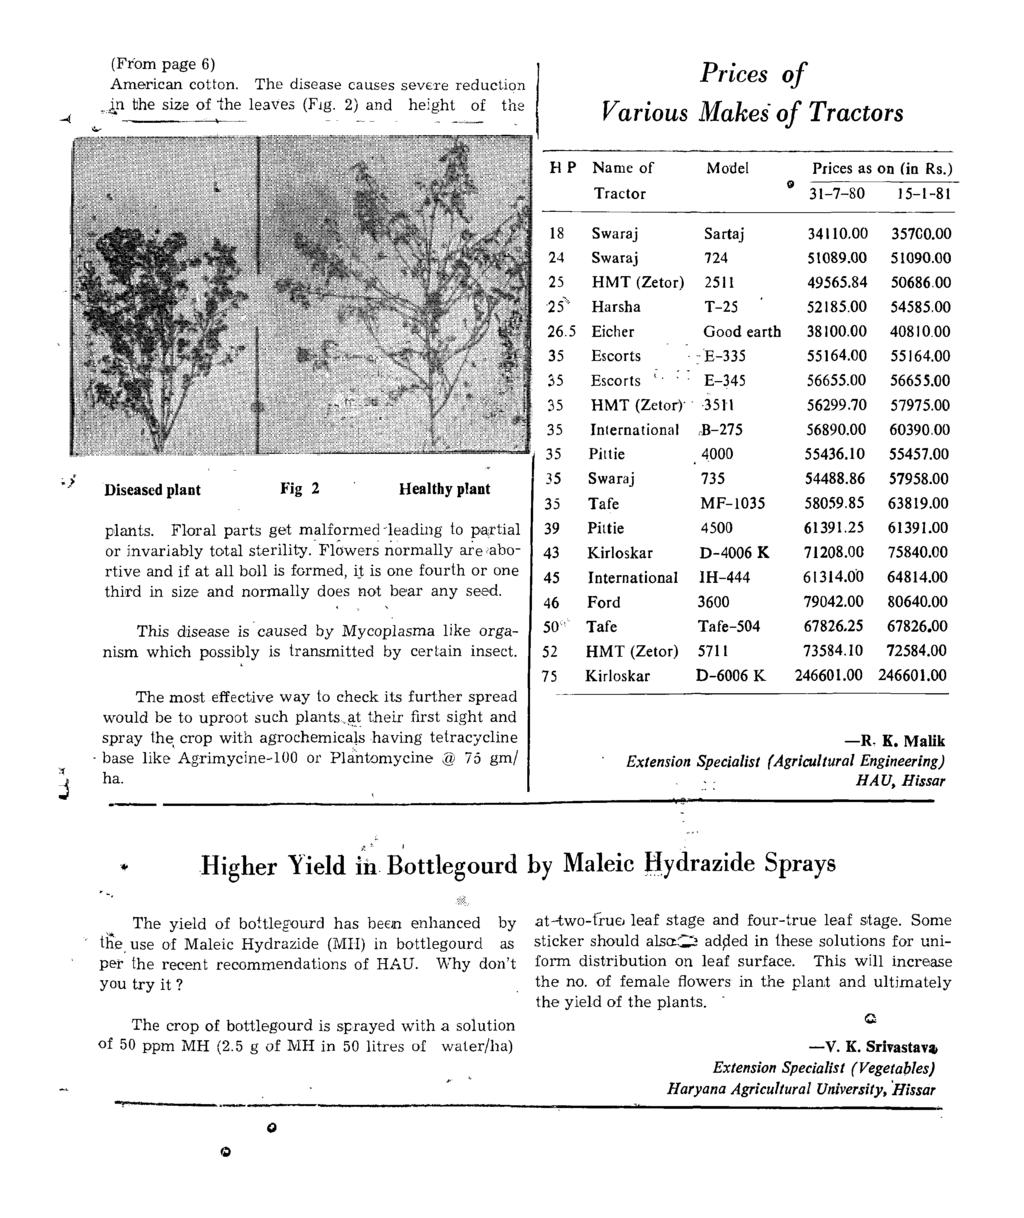 (From page 6) American cotton. The disease causes sevete reduction -ip the si~e of the leaves (Flg.